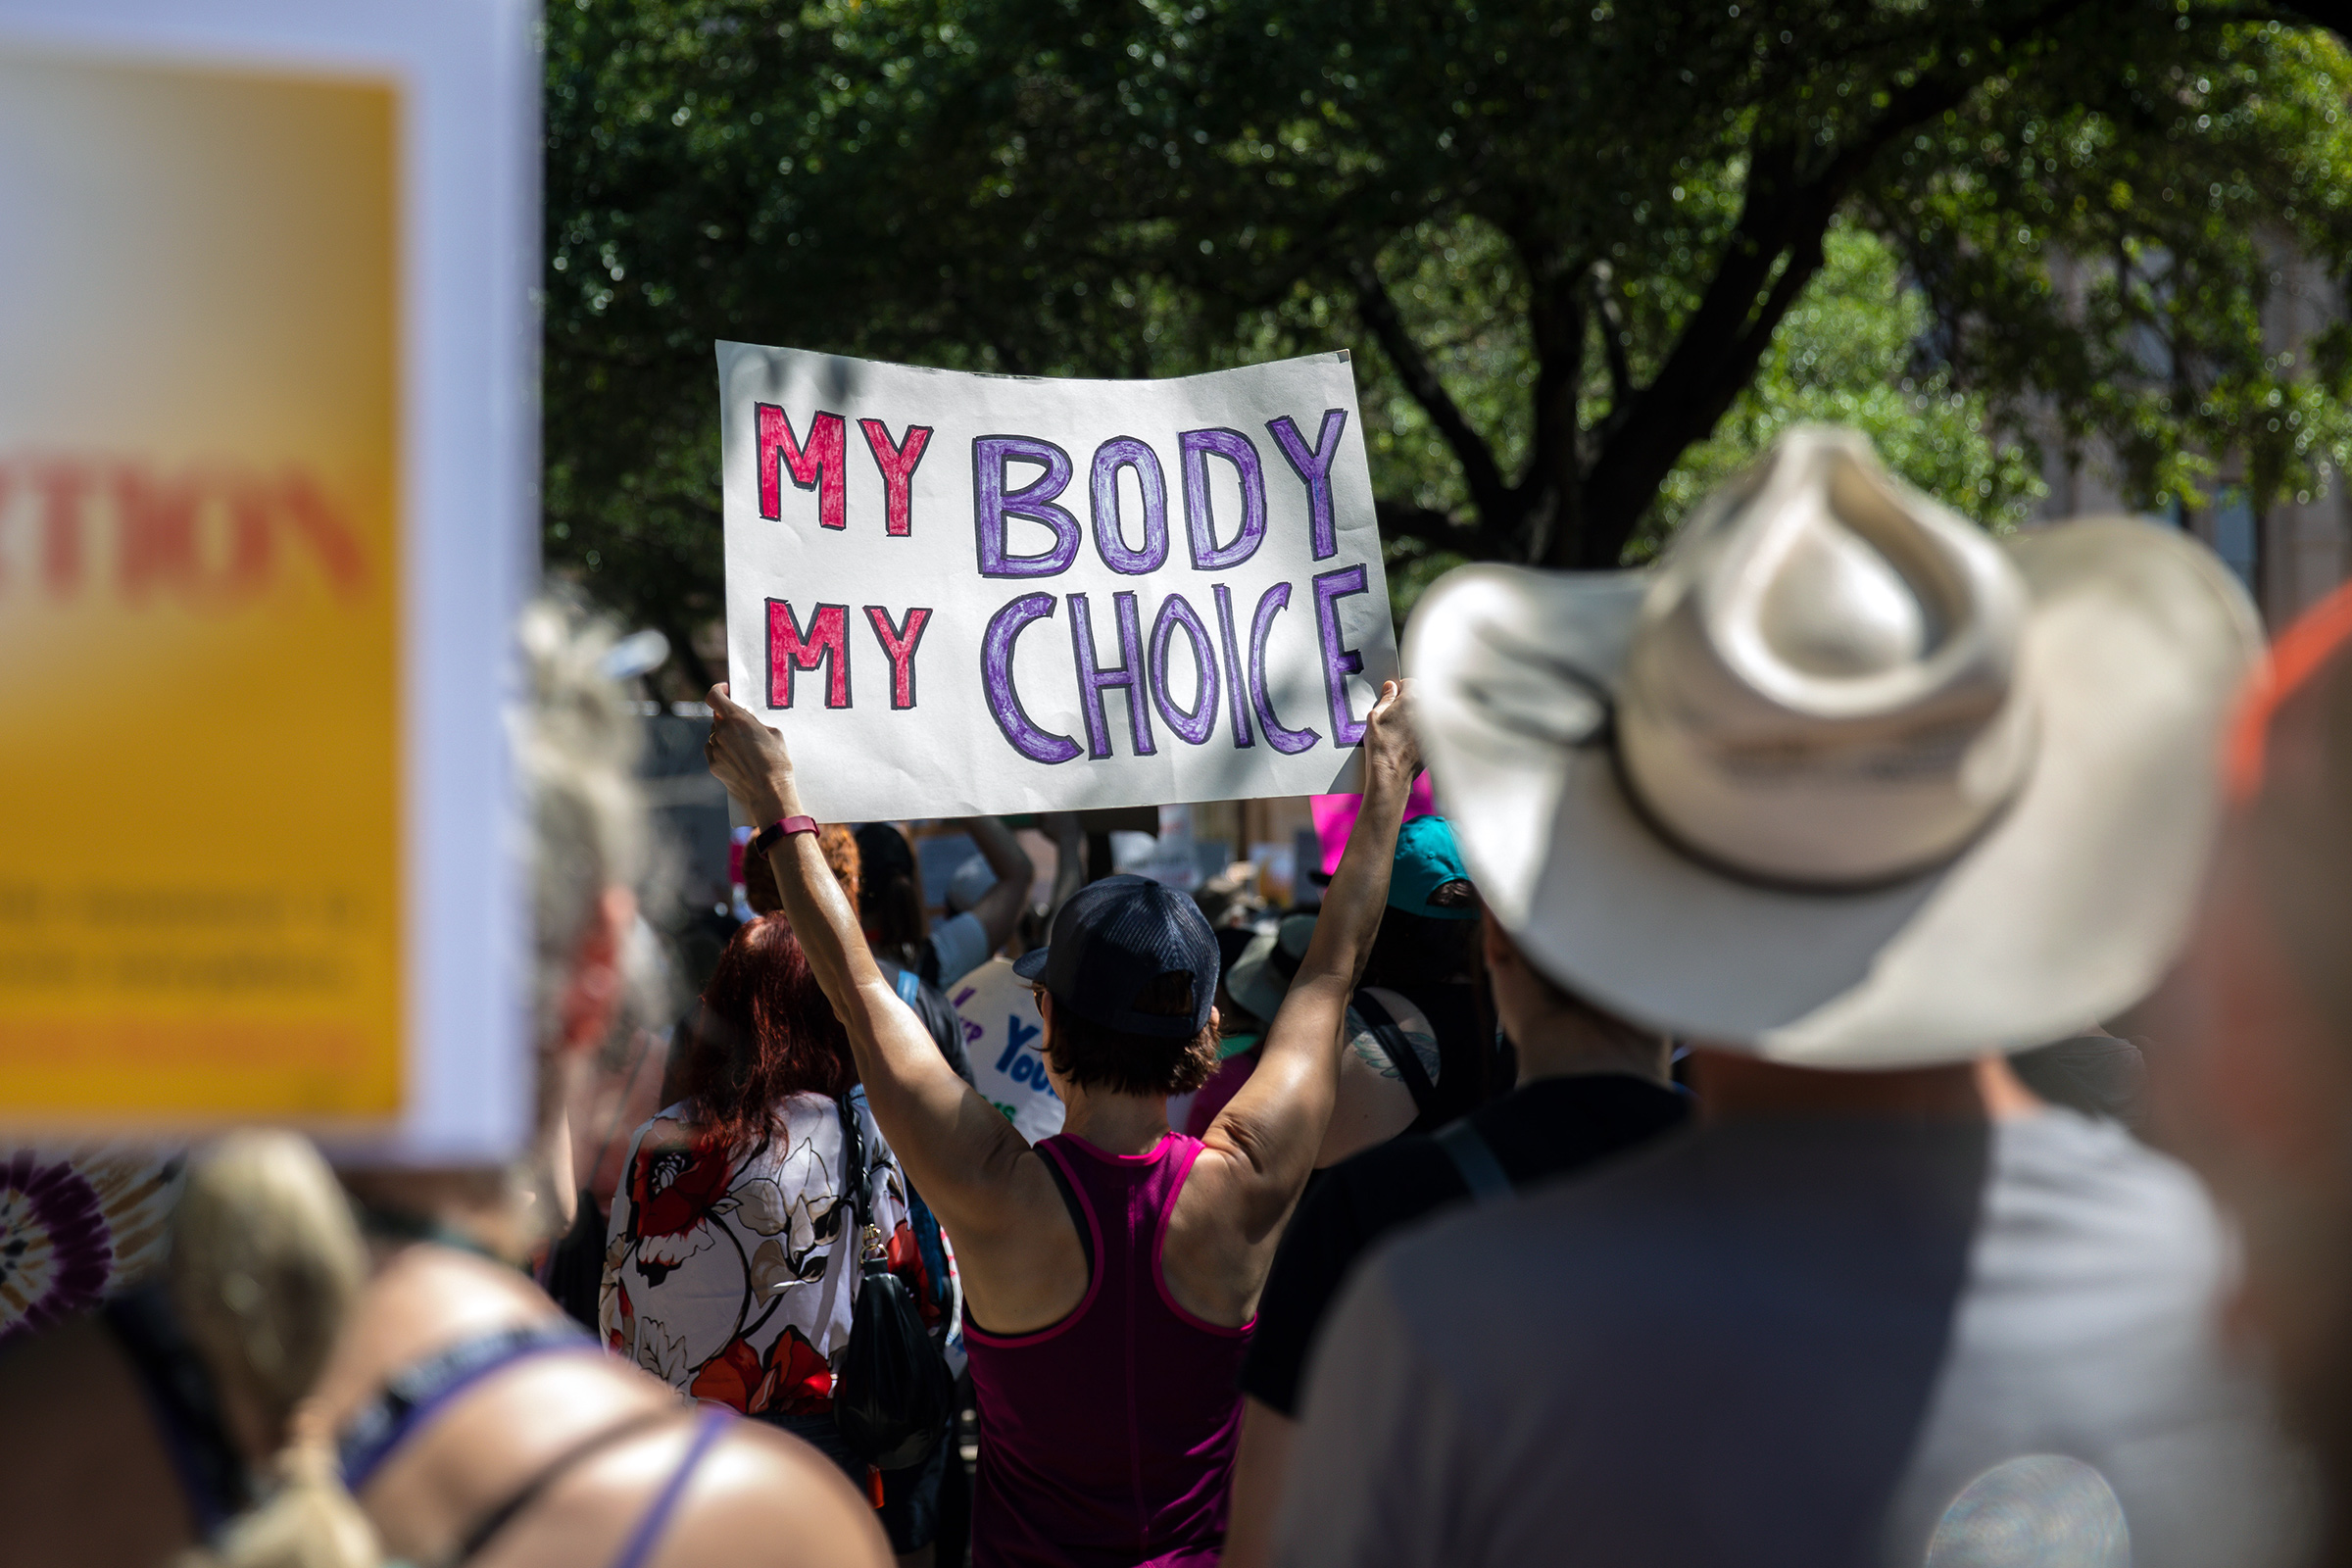 Pro-choice supporters rally for reproductive rights at the Texas Capitol on May 14, 2022 in Austin, Texas. (Montinique Monroe—Getty Images)